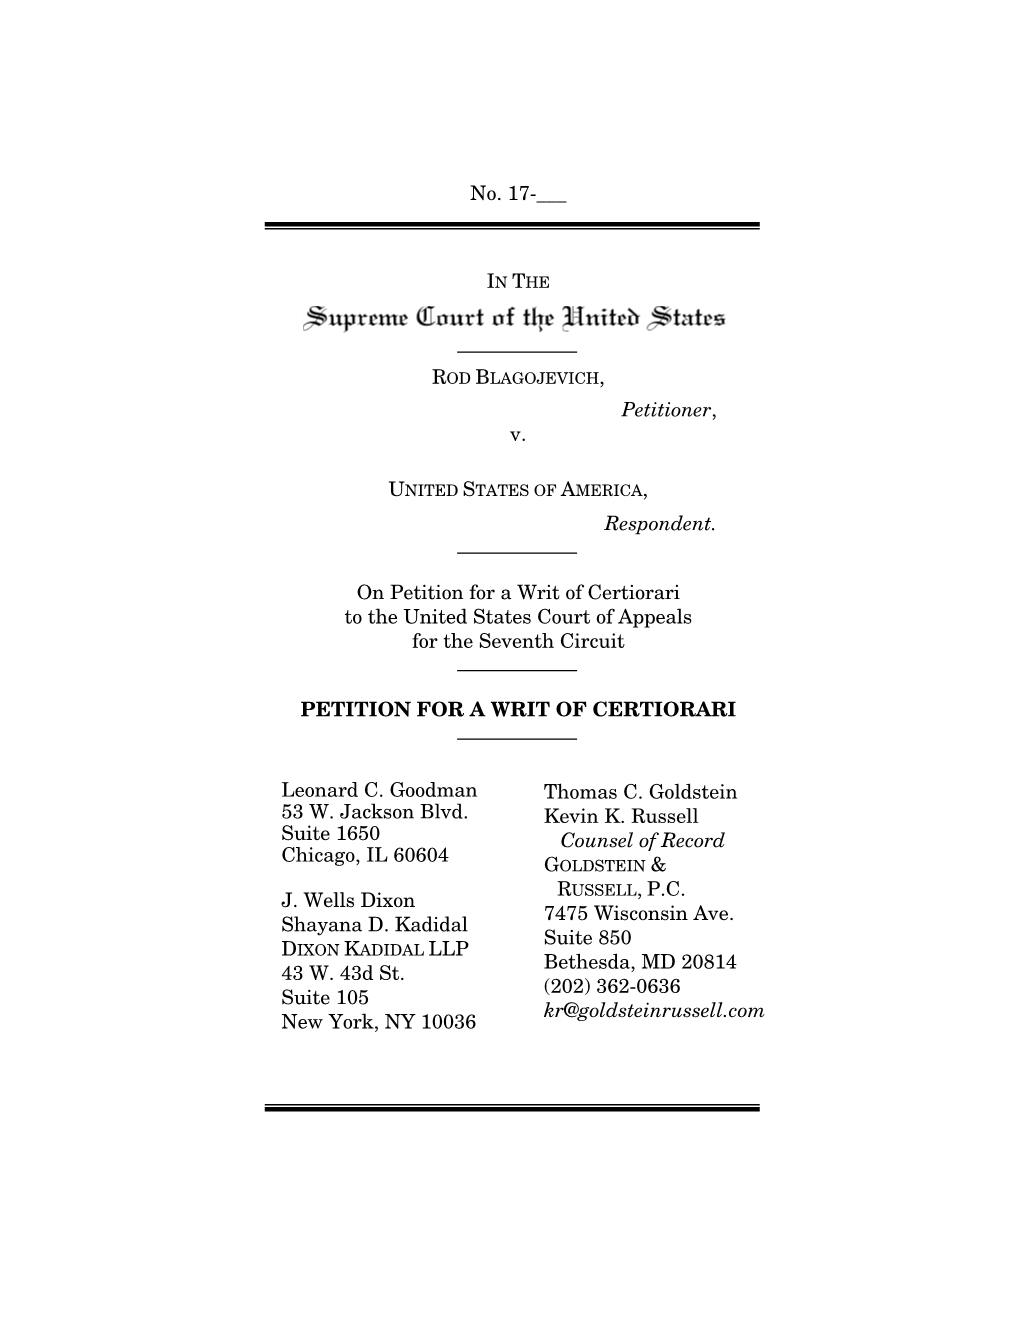 Petitioner, V. Respondent. on Petition for a Writ of Certiorari to the United States Court of Appeals for the Seventh